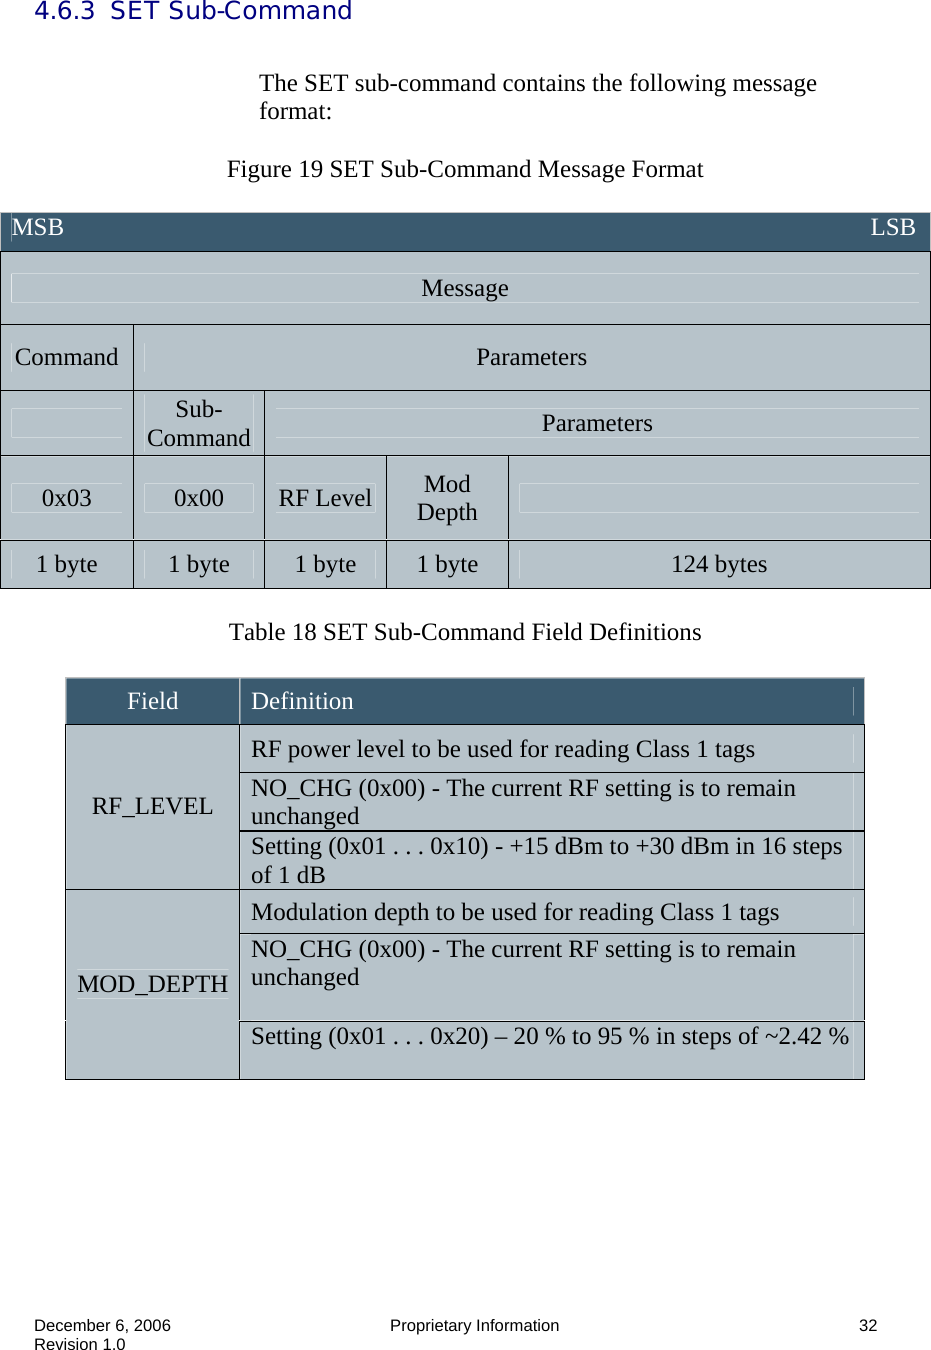  December 6, 2006  Proprietary Information      32 Revision 1.0 4.6.3  SET Sub-Command  The SET sub-command contains the following message format:  Figure 19 SET Sub-Command Message Format   Table 18 SET Sub-Command Field Definitions     MSB                                                                                                                                 LSB Message Command  Parameters  Sub-Command  Parameters 0x03  0x00  RF Level  Mod Depth   1 byte  1 byte  1 byte  1 byte  124 bytes Field  Definition RF power level to be used for reading Class 1 tags NO_CHG (0x00) - The current RF setting is to remain unchanged RF_LEVEL Setting (0x01 . . . 0x10) - +15 dBm to +30 dBm in 16 steps of 1 dB Modulation depth to be used for reading Class 1 tags NO_CHG (0x00) - The current RF setting is to remain unchanged  MOD_DEPTH Setting (0x01 . . . 0x20) – 20 % to 95 % in steps of ~2.42 %  